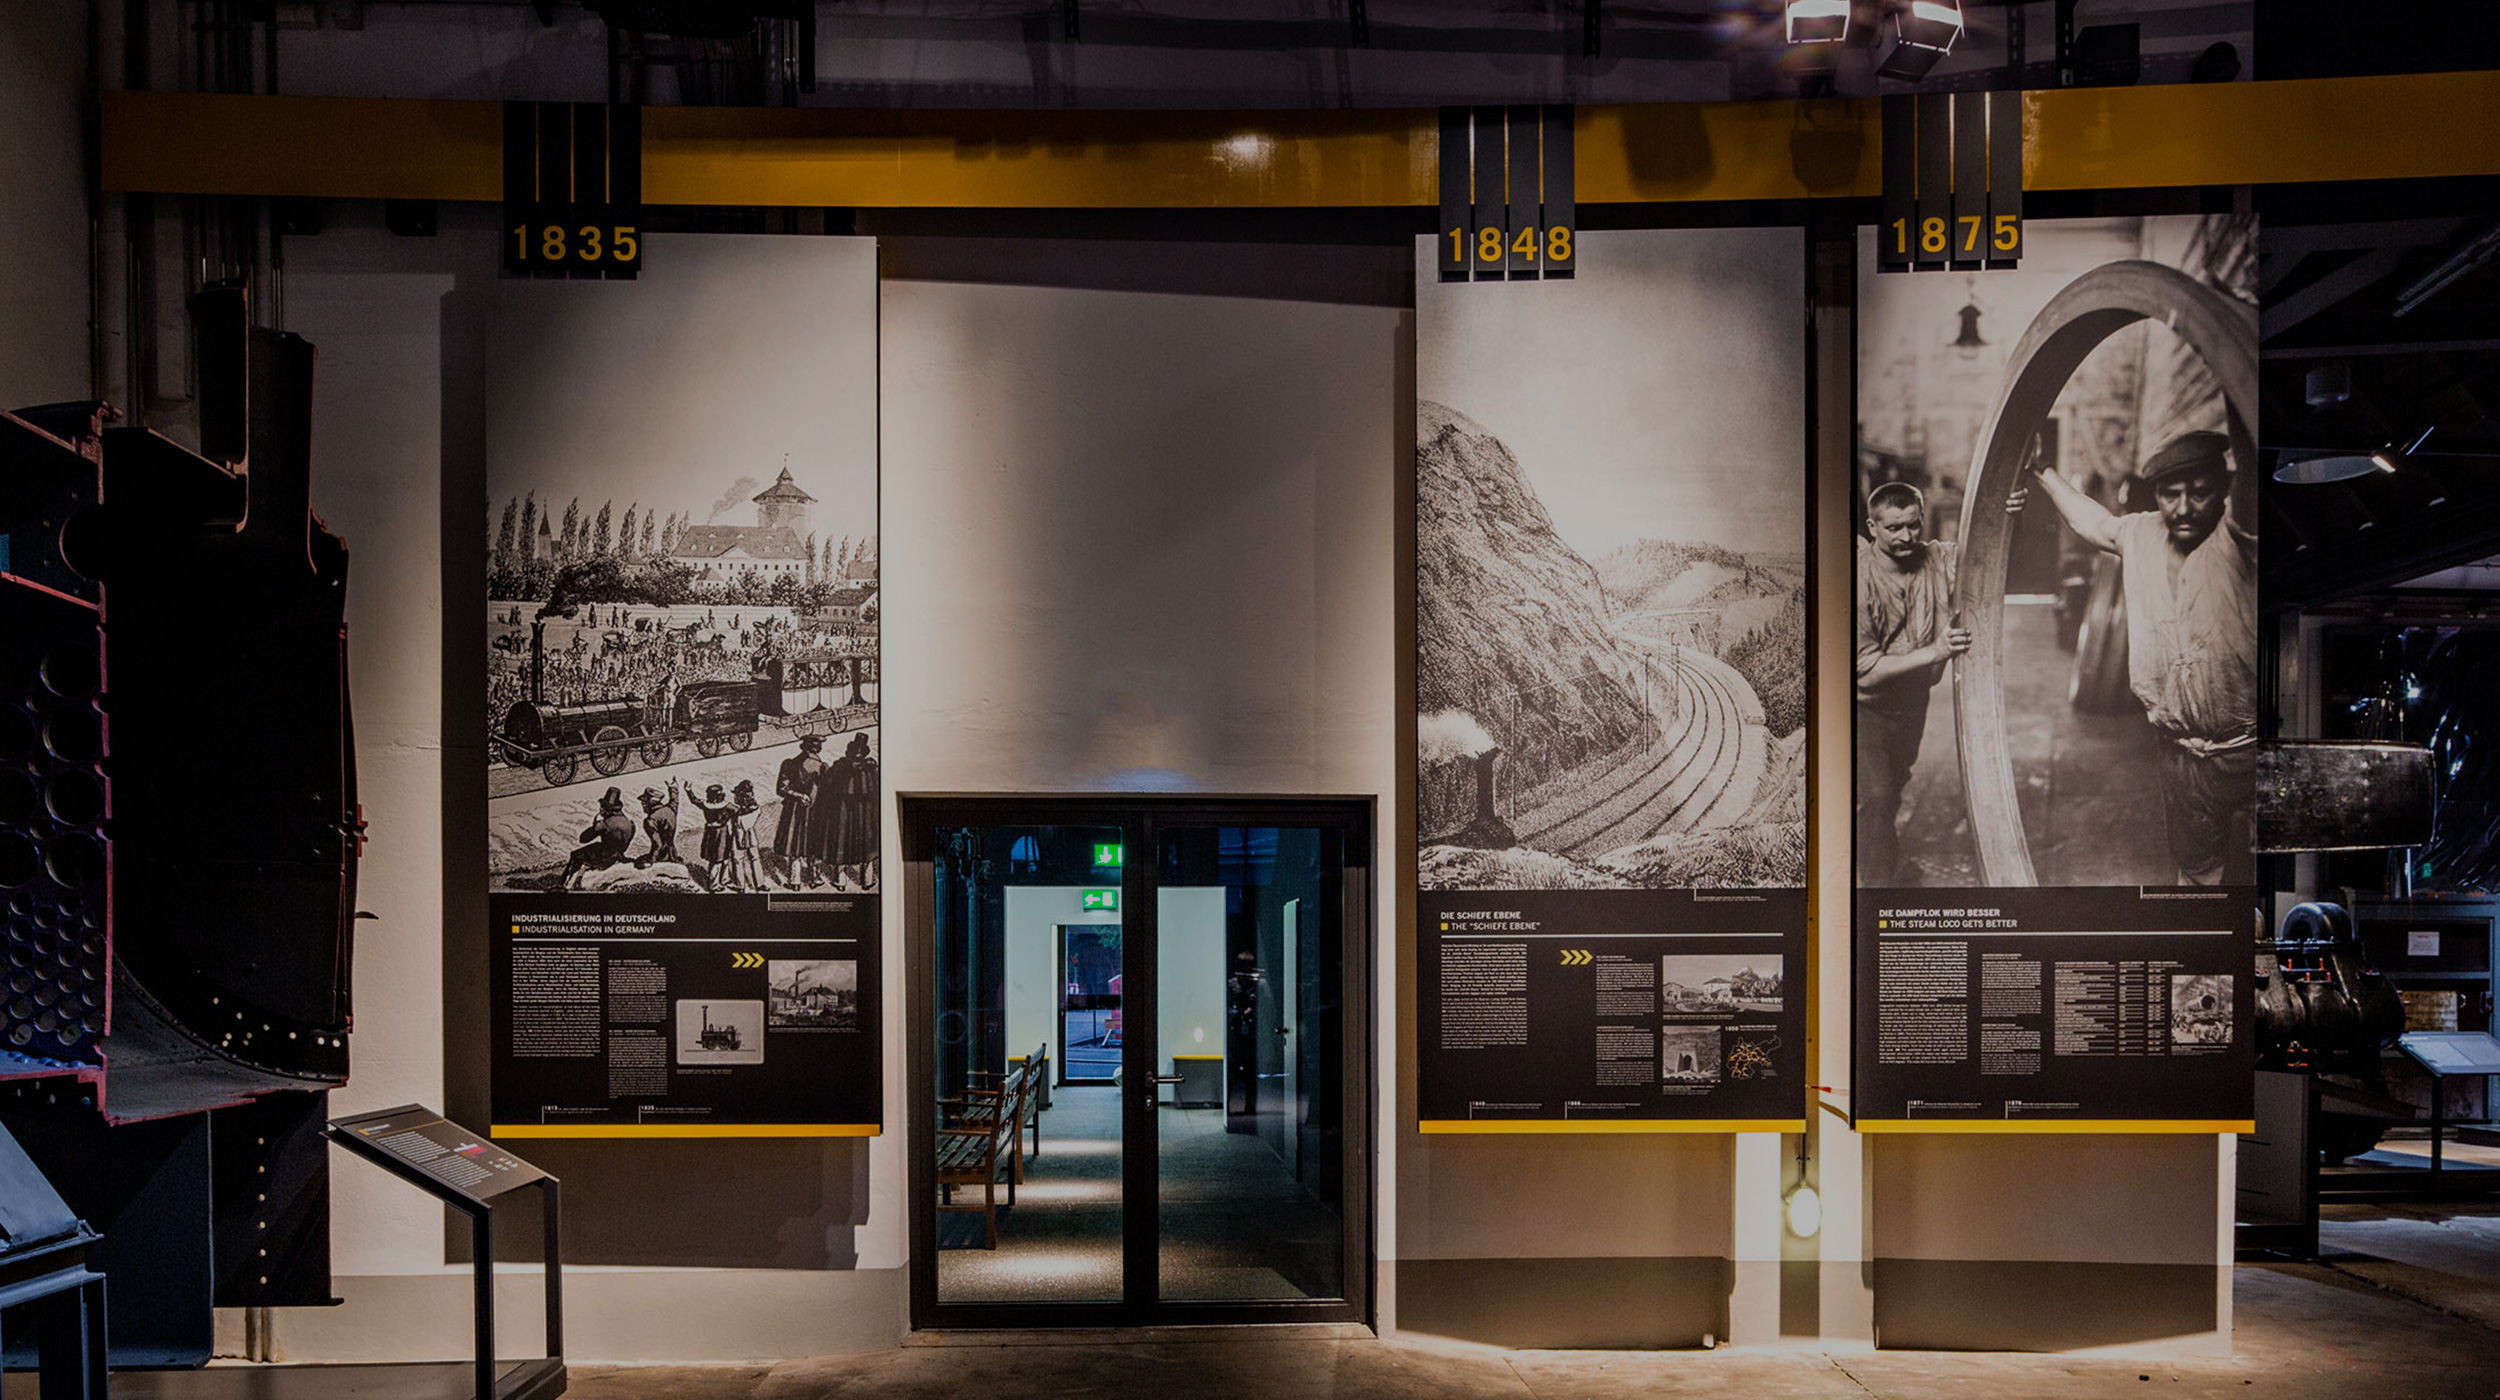 Three large information board about different periods of the railway era hanging inside the museum